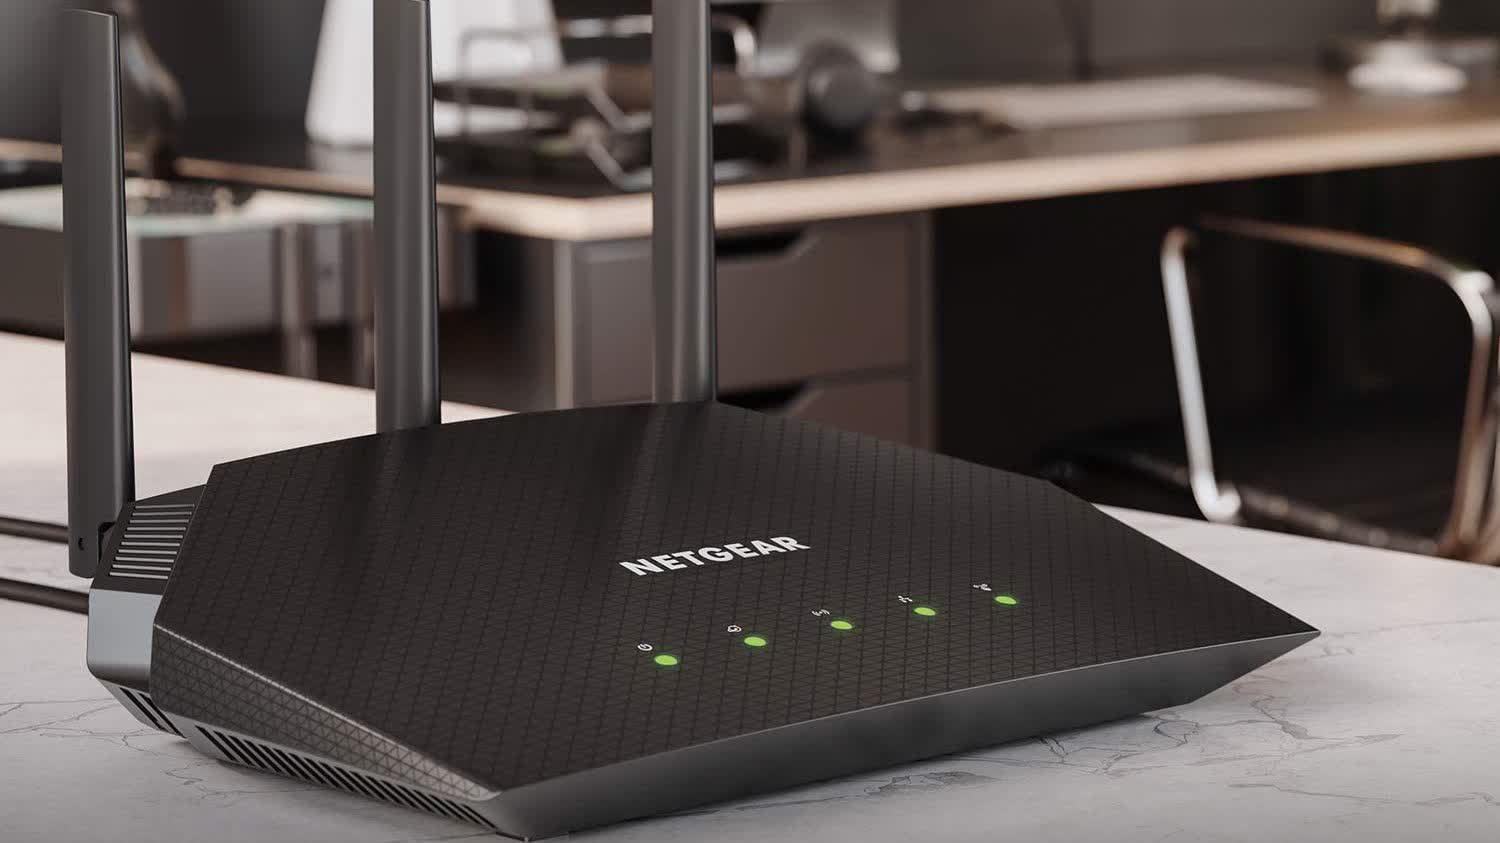 Own one of these 11 Netgear routers? If so, patch it immediately